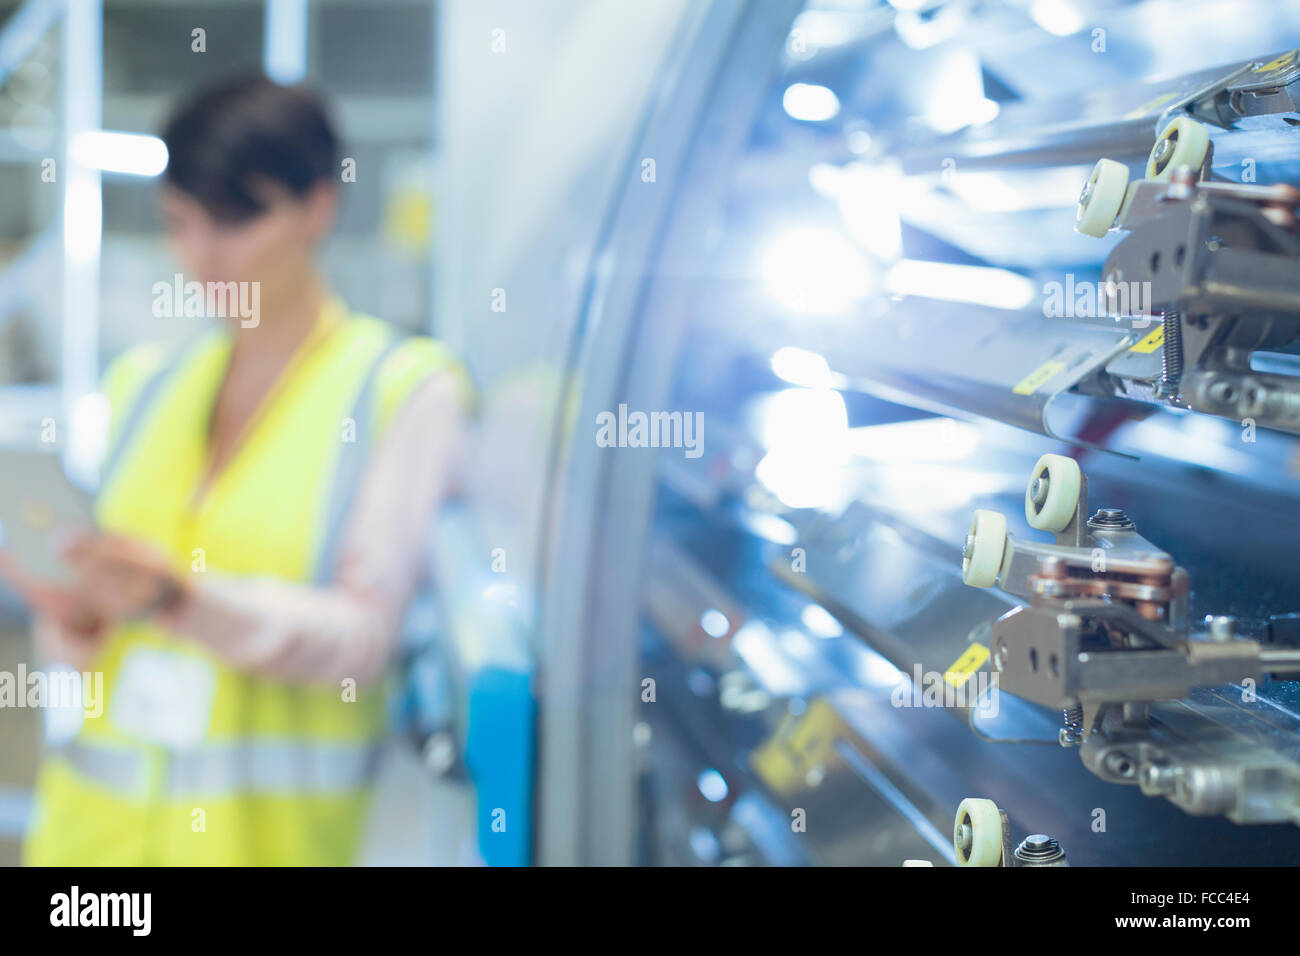 Worker behind machinery in factory Stock Photo